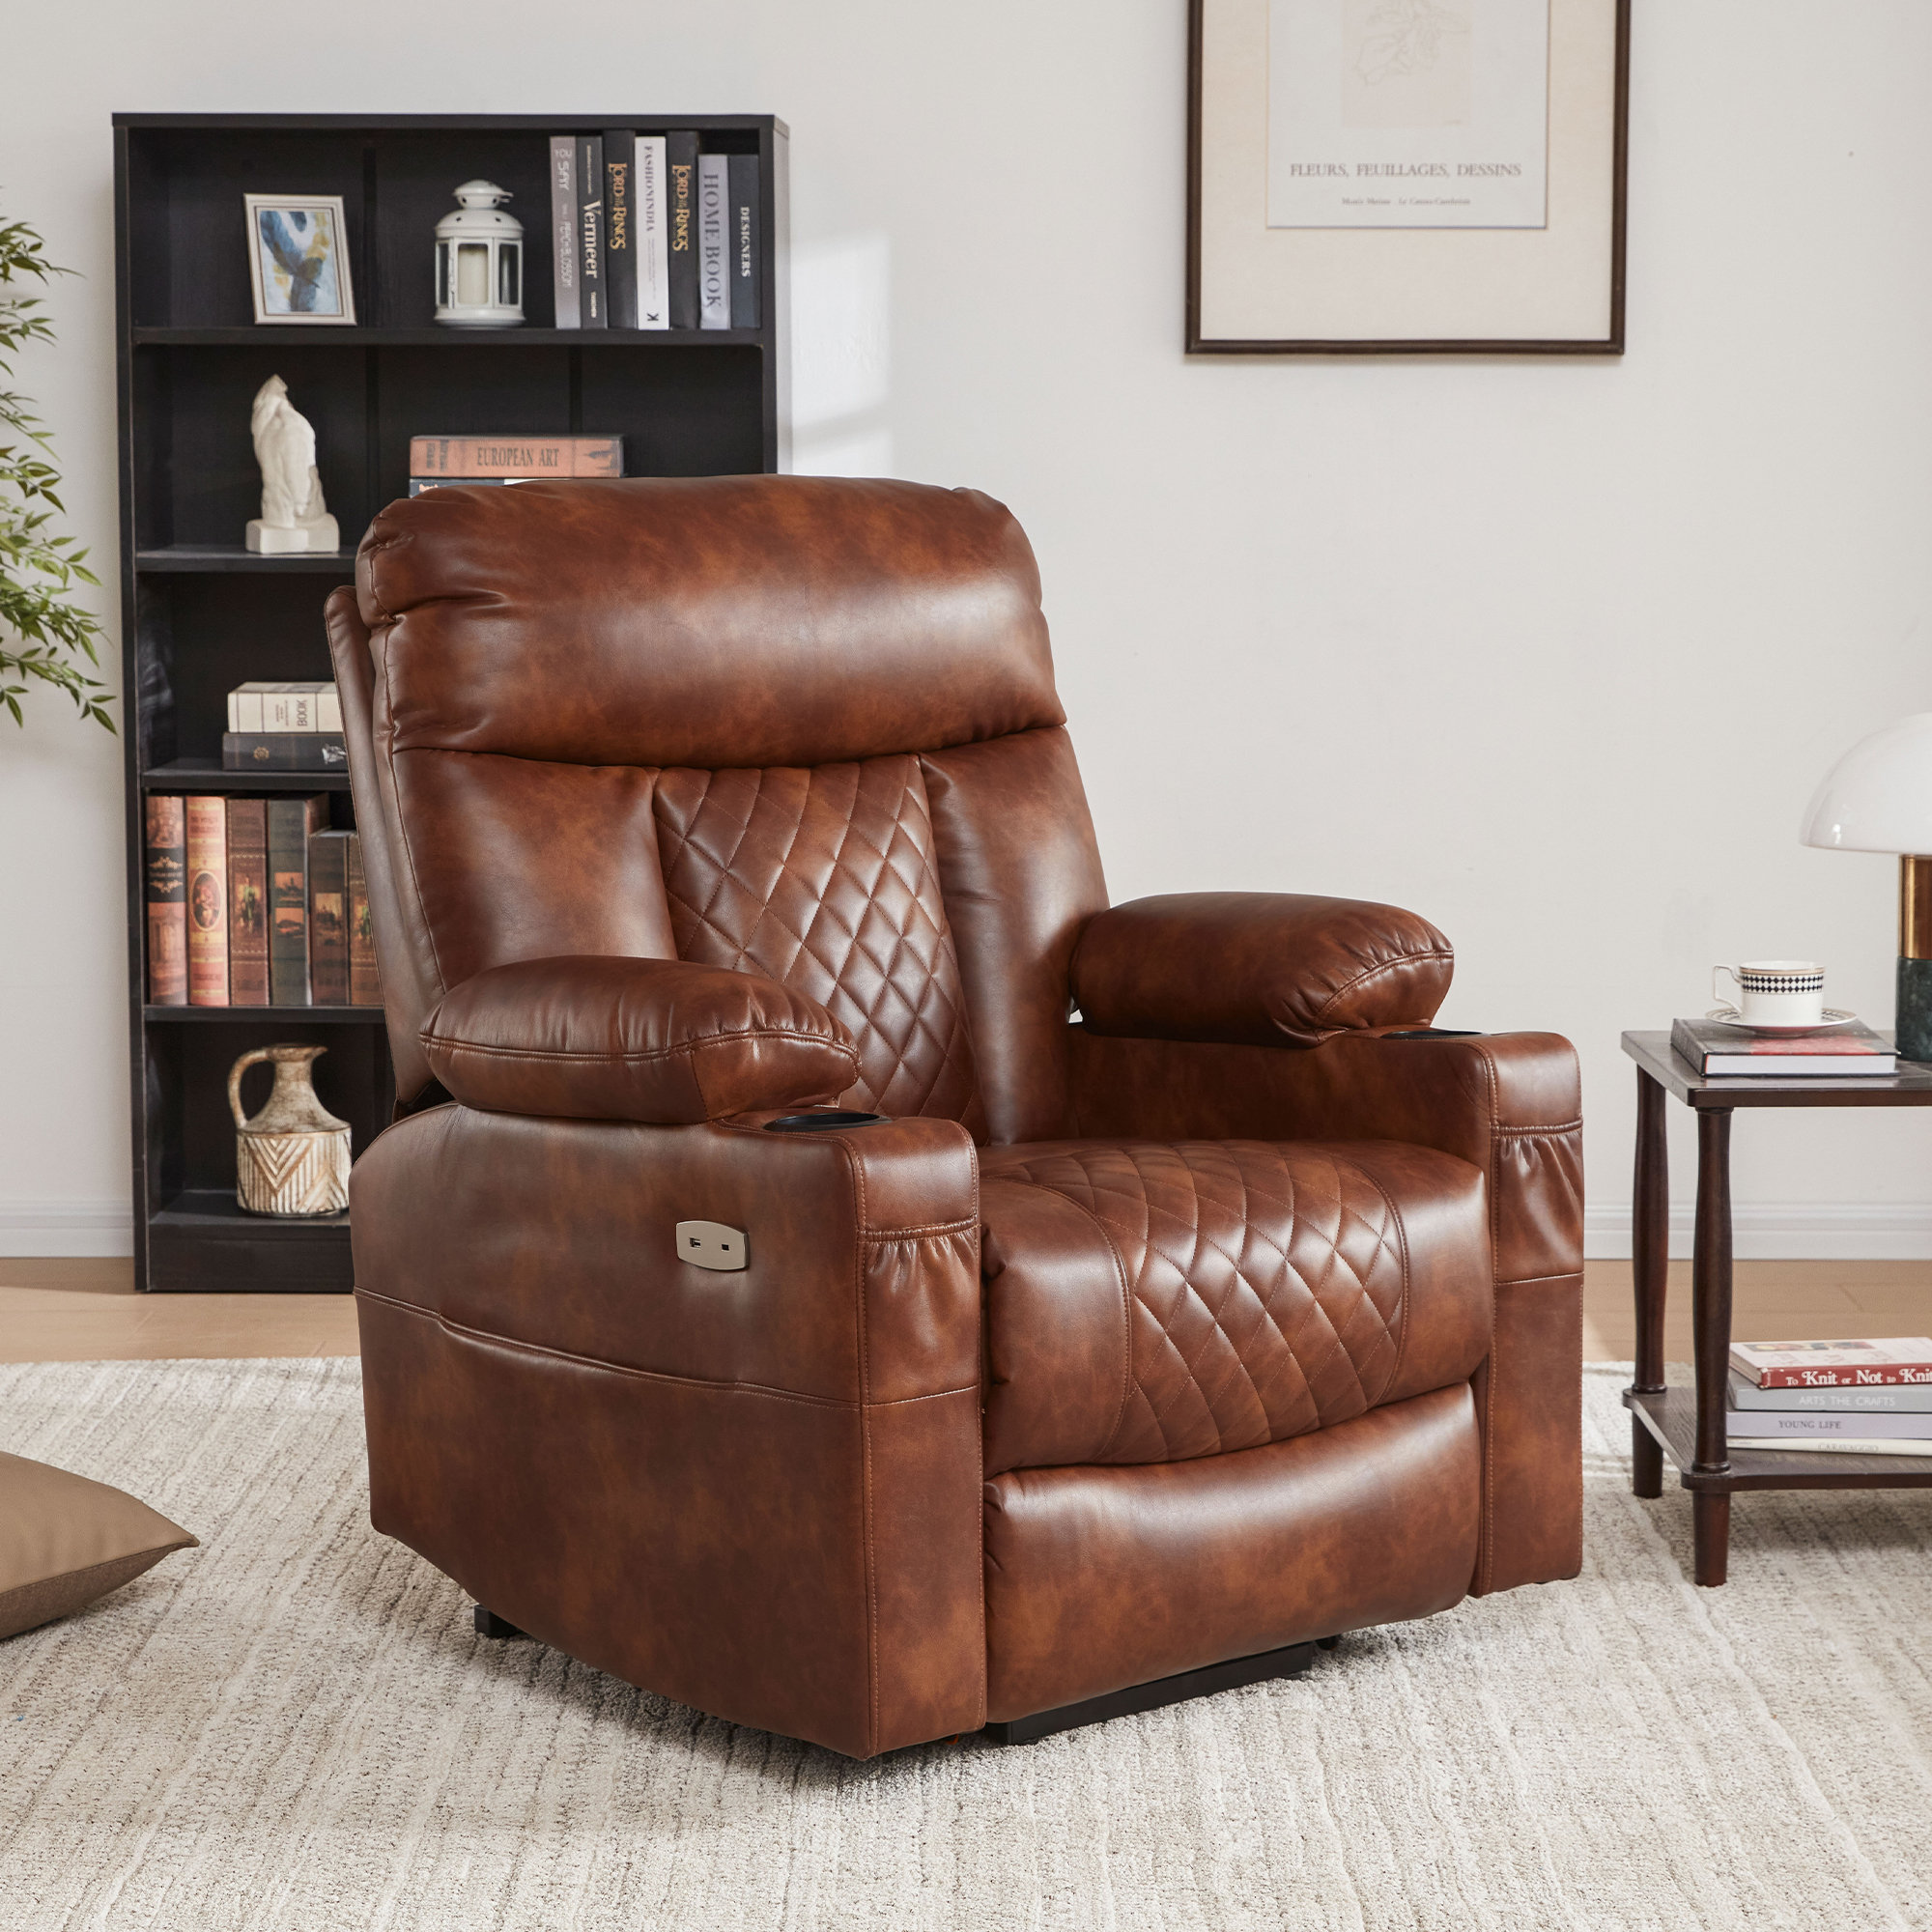 Wayfair Leather Lift Recliner | Reviews & and Wade Vegan Chair with Heating Bislim Functions Massage Logan® Power